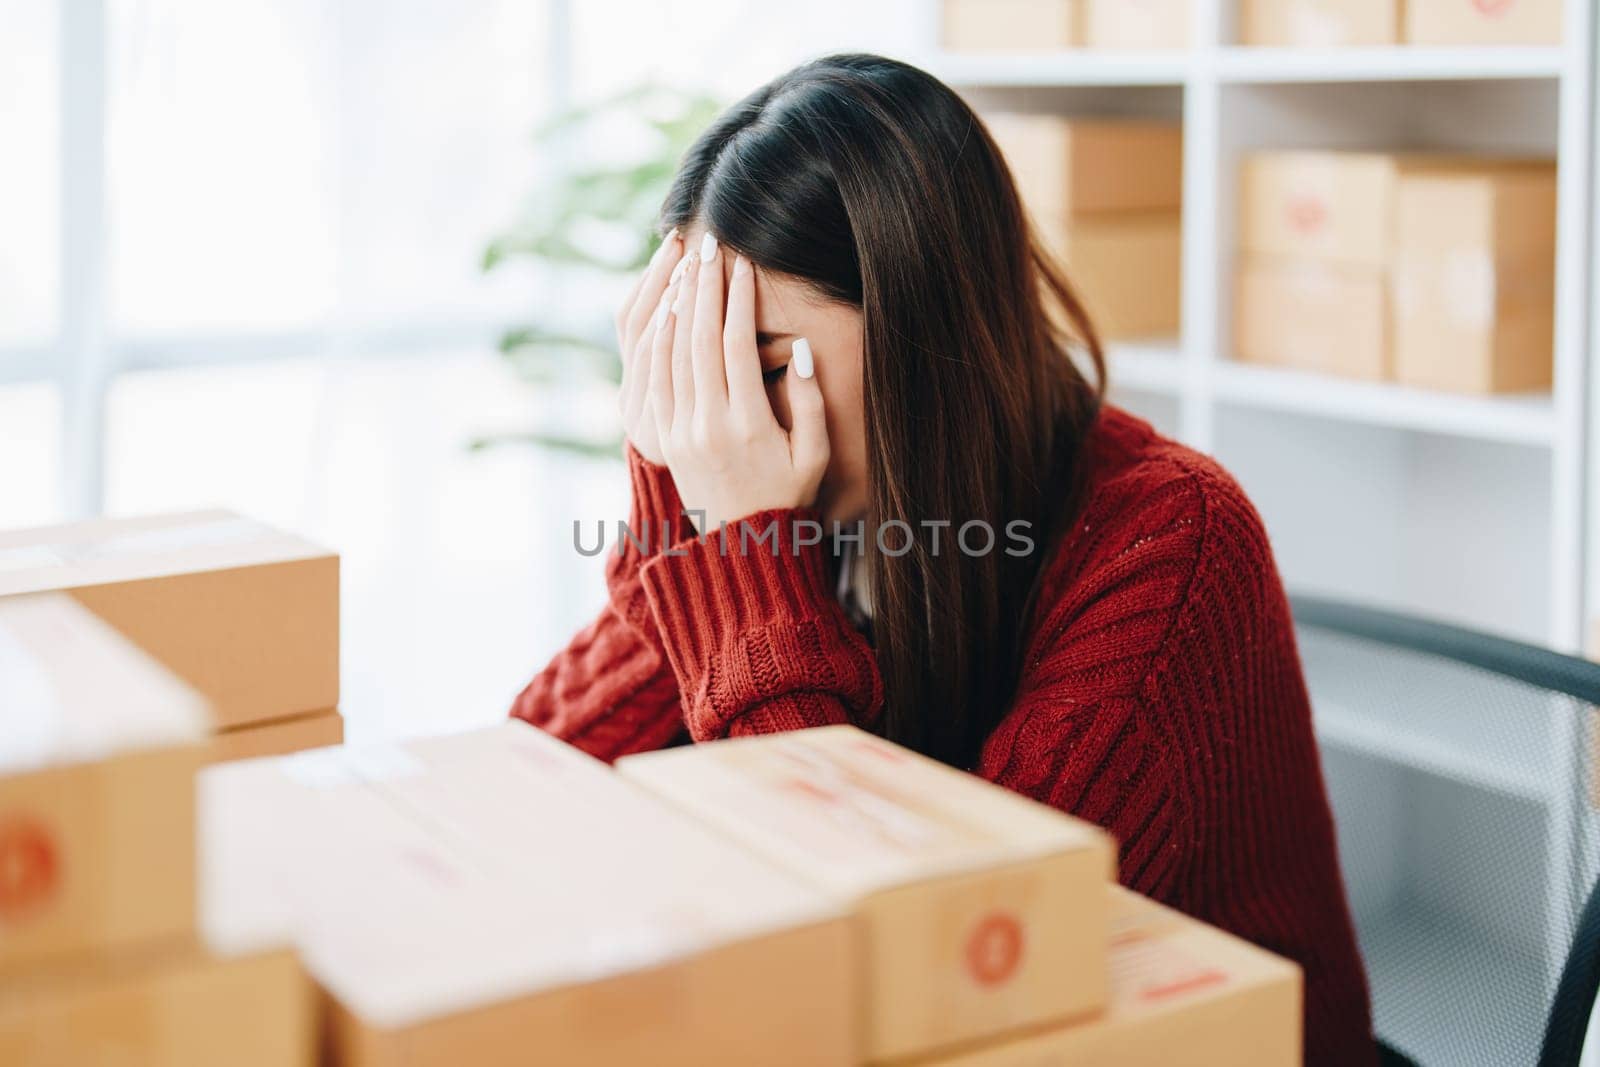 Starting small business entrepreneur of independent Asian woman showing her face worried about the sales of her business not reaching the target set. SME concepts.